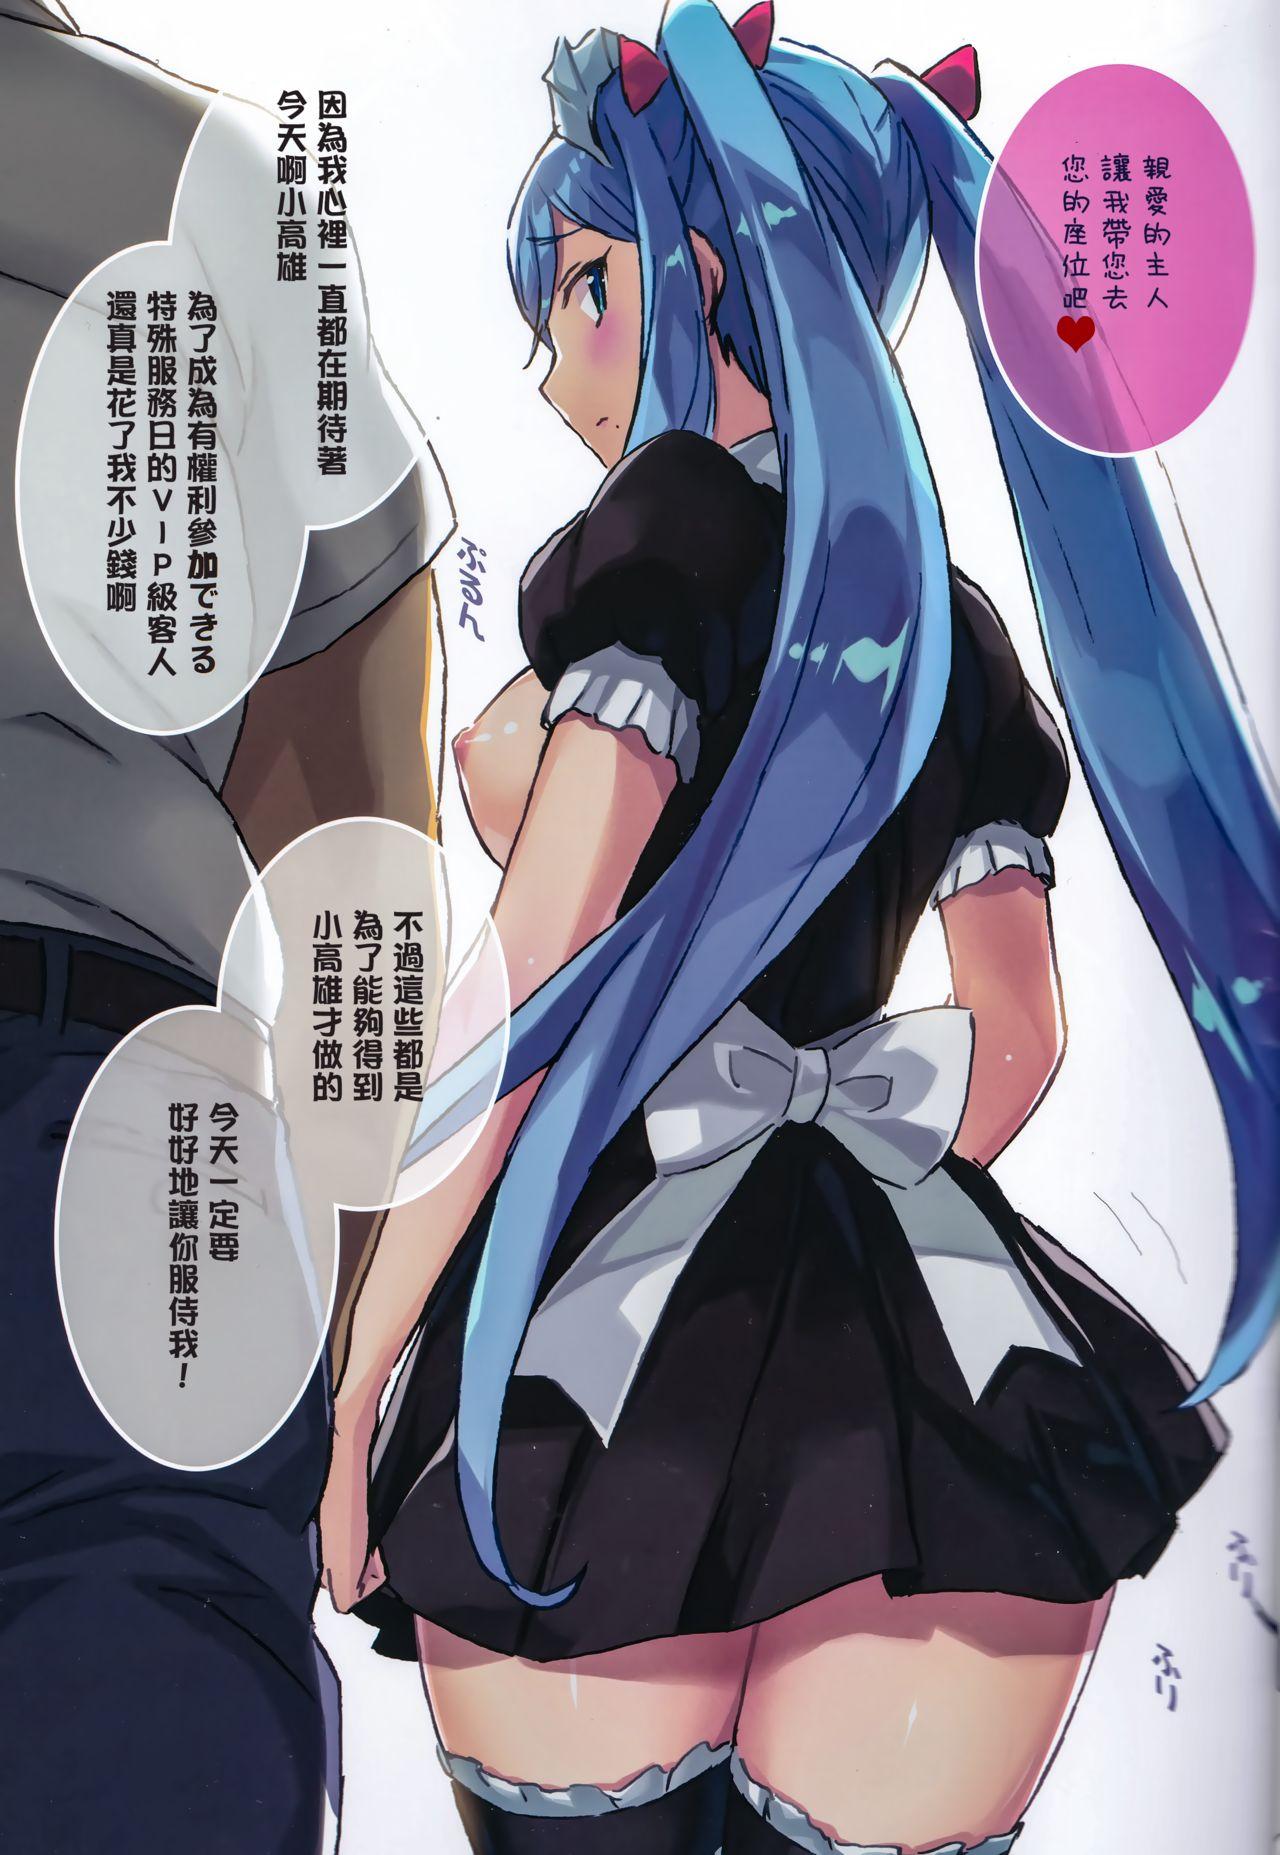 Hardcore TAKAO OF BLUE STEEL 10 - Arpeggio of blue steel Gay Outdoor - Page 7